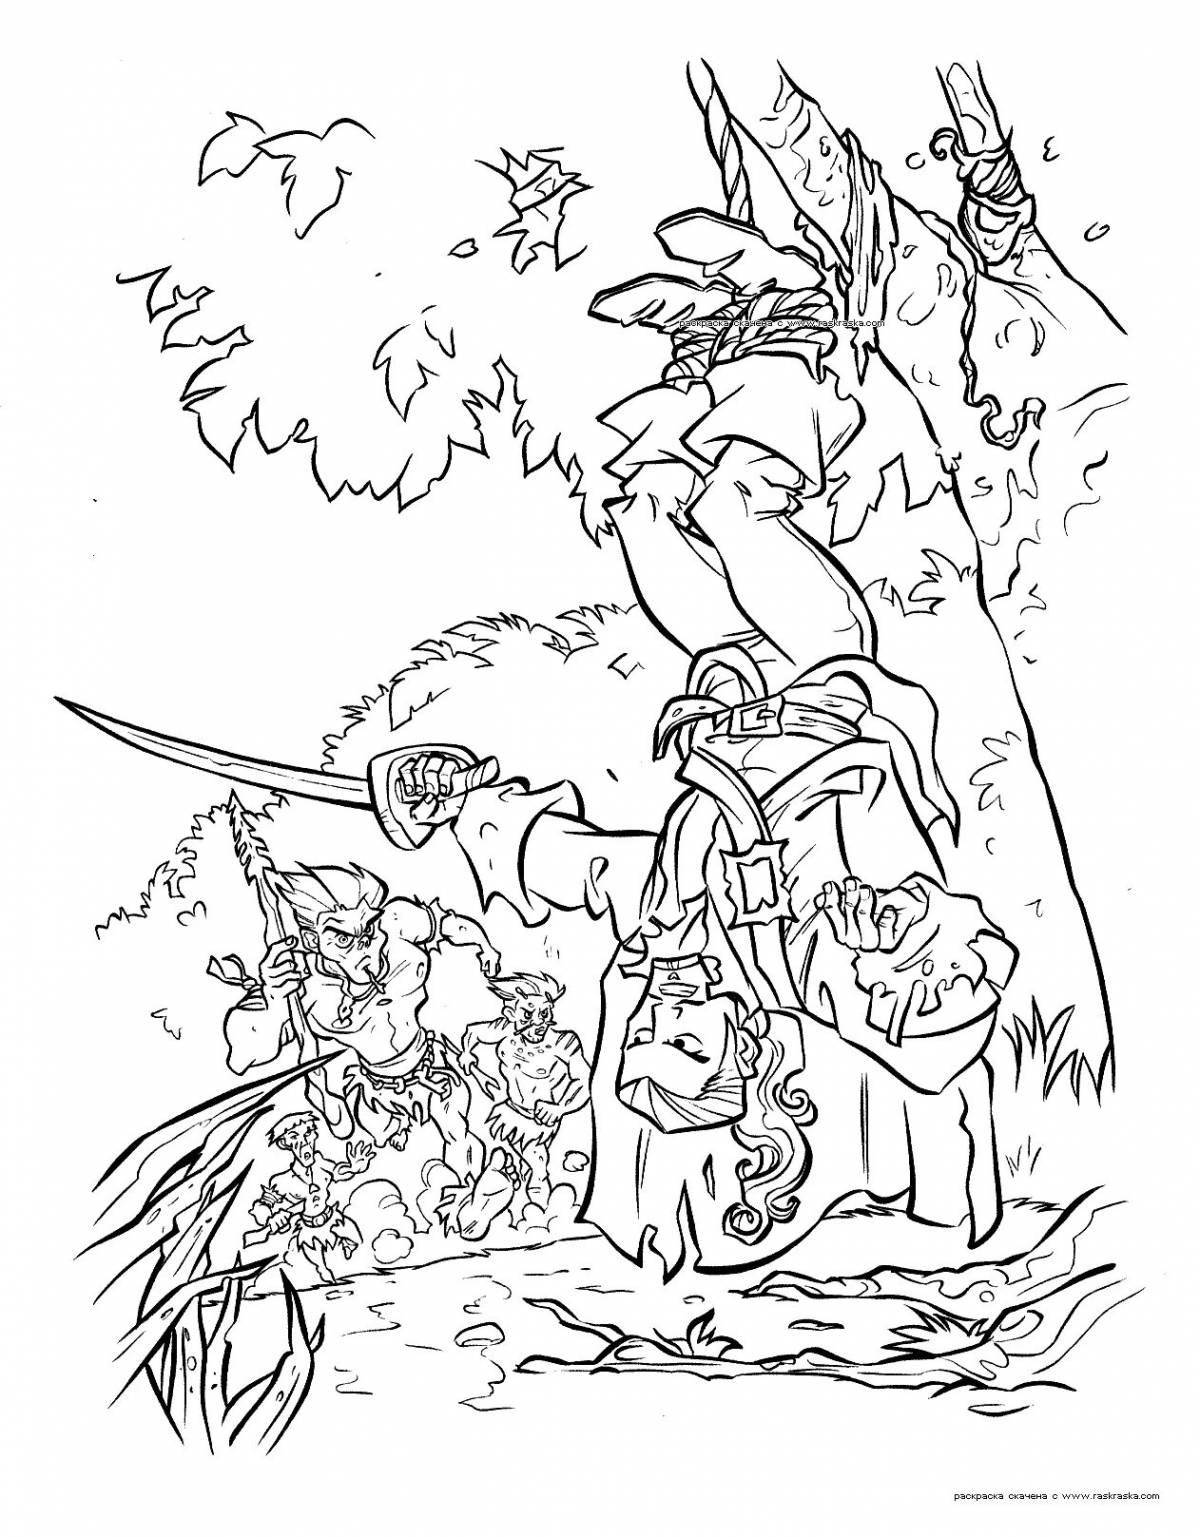 Playful cannibal coloring page